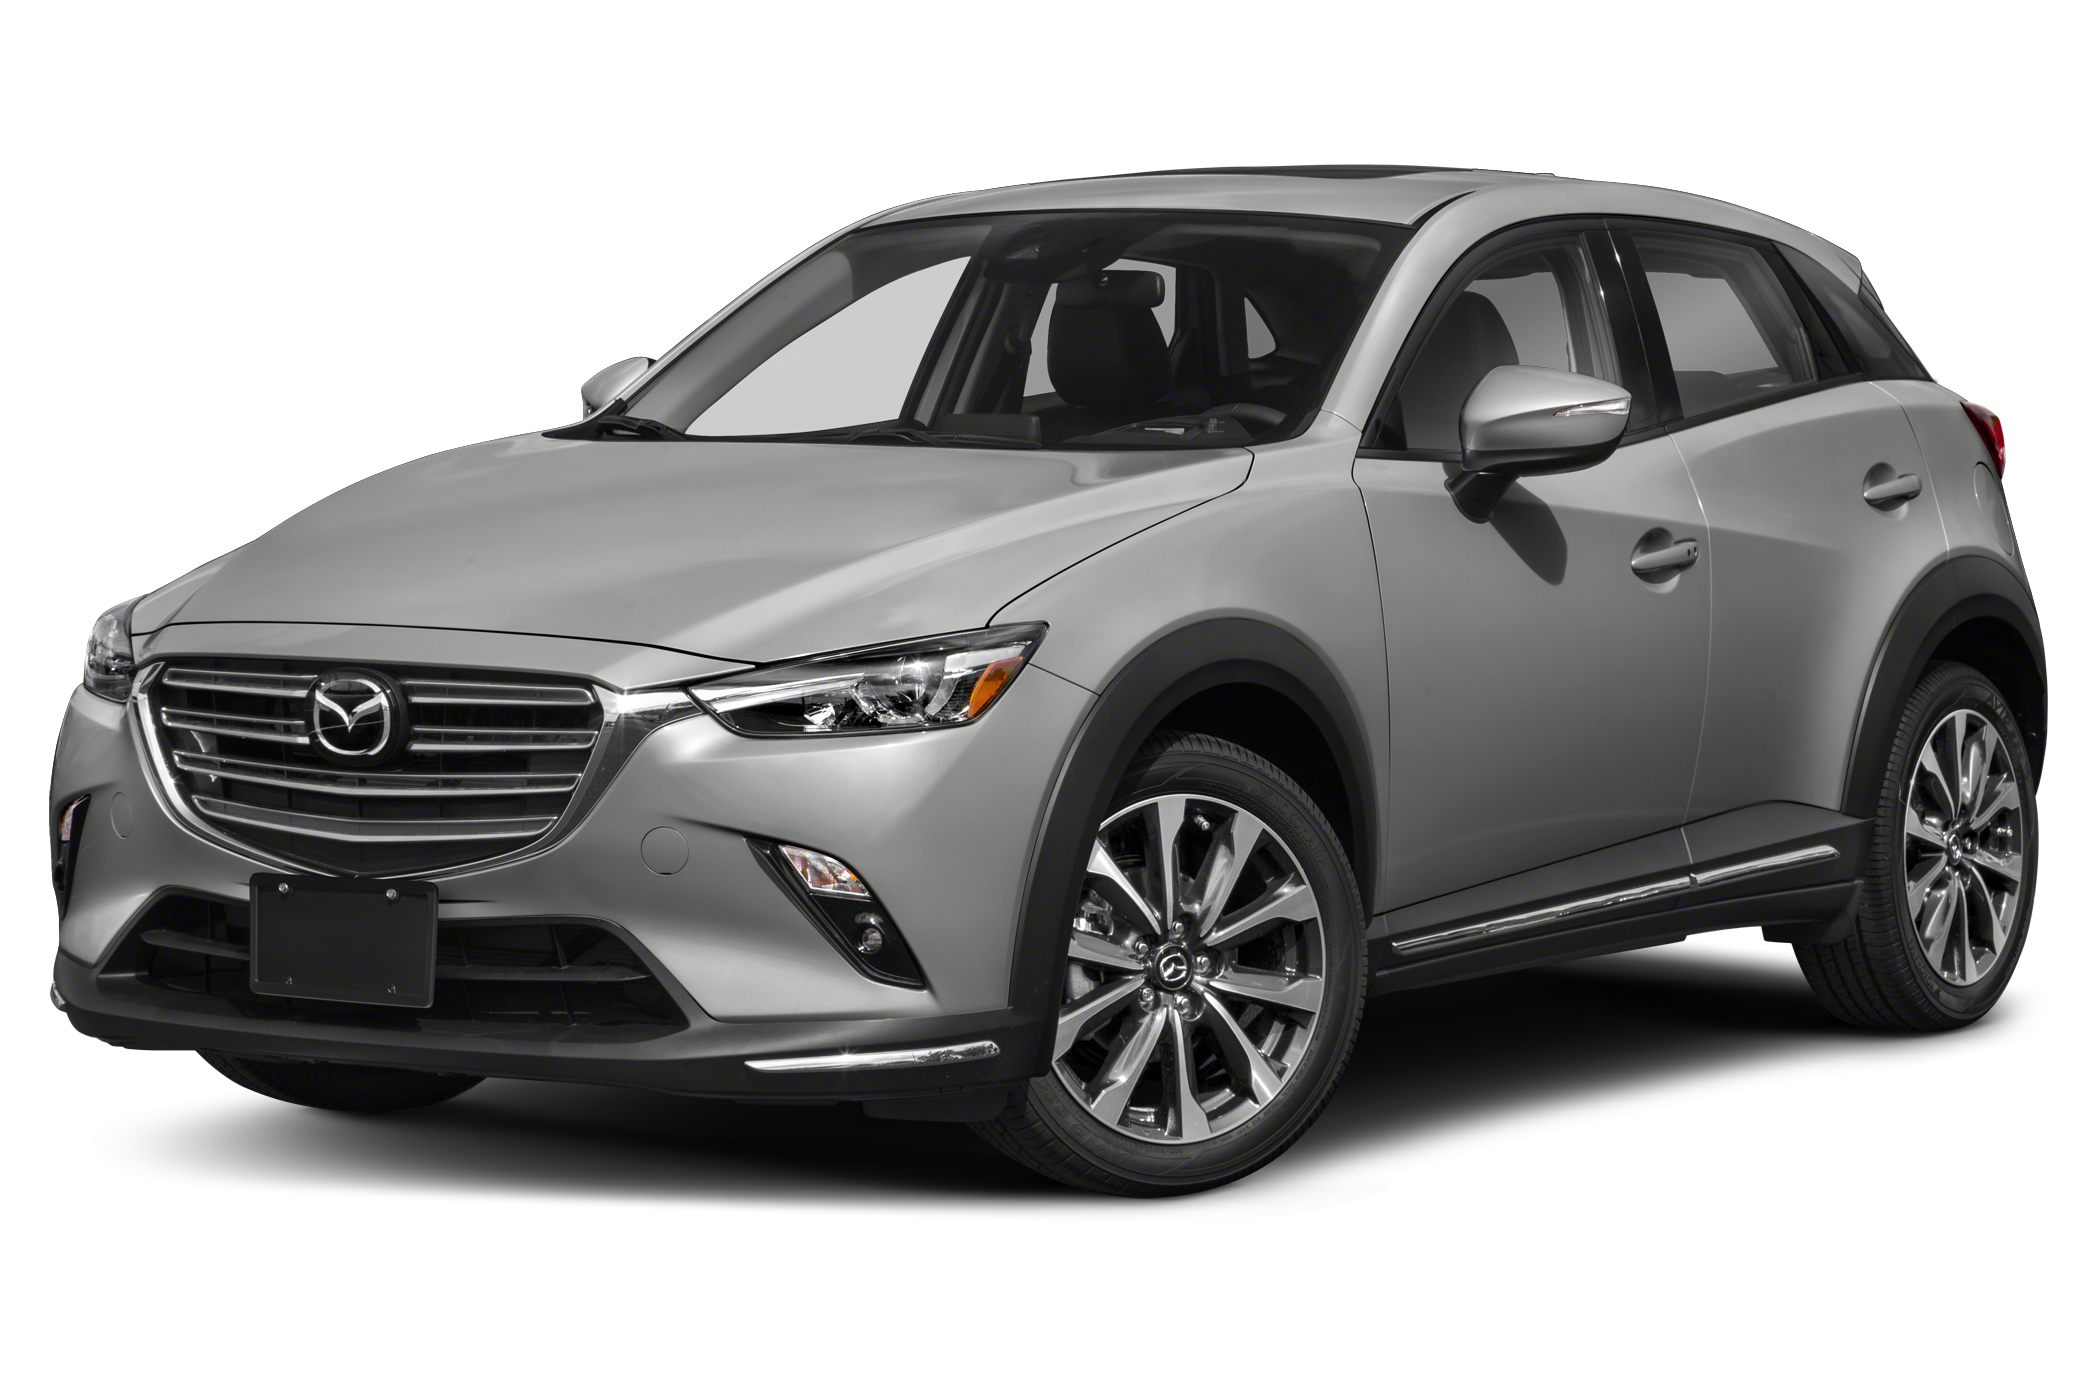 2019 Mazda Cx 3 Grand Touring 4dr Front Wheel Drive Sport Utility Pictures